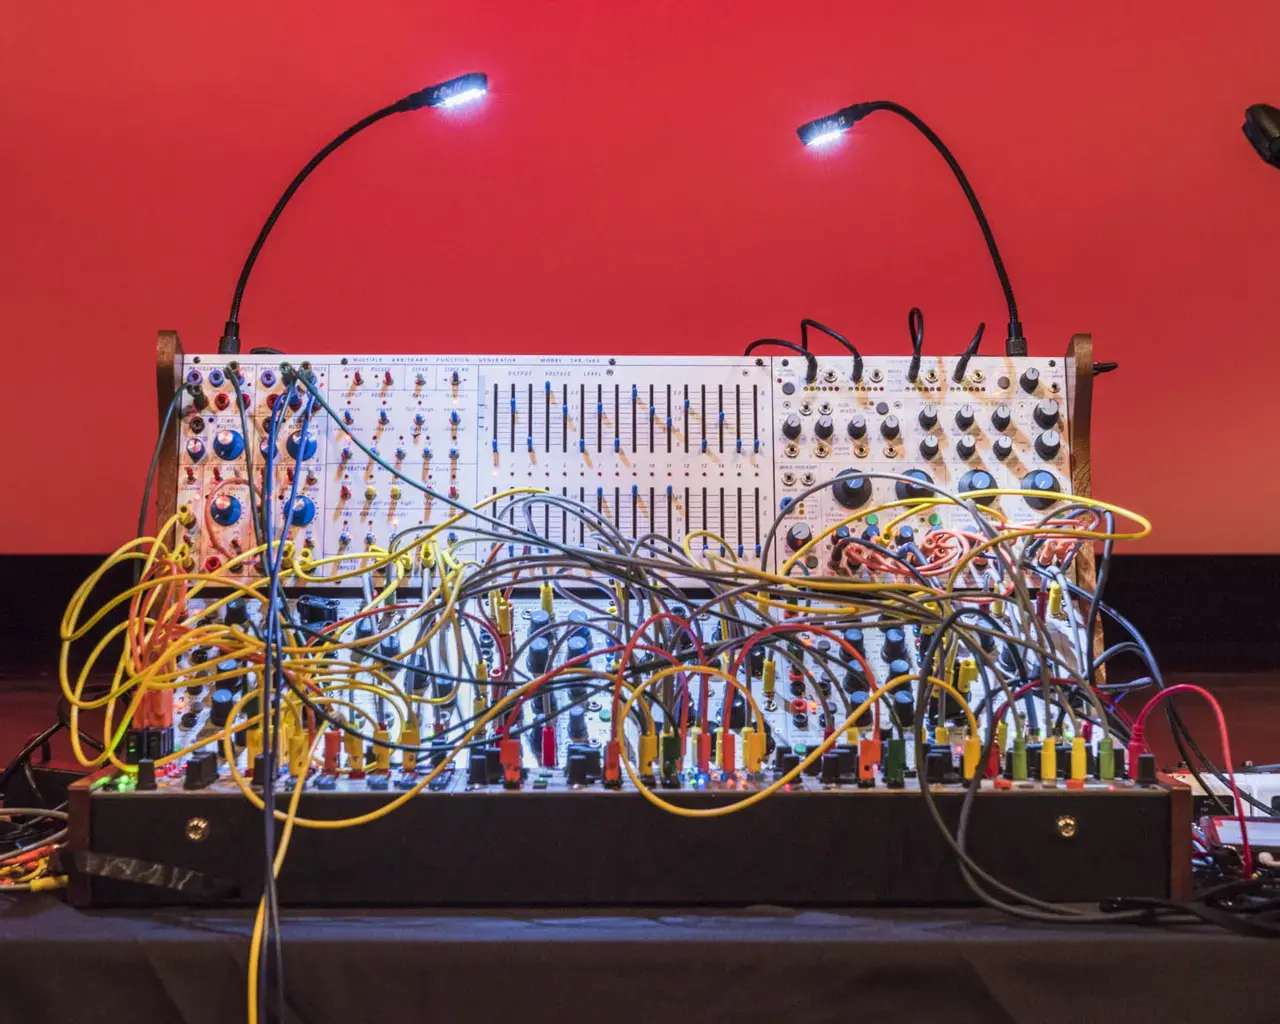 The Buchla instrument, invented by Don Buchla. Photo by Jamie Alvarez.